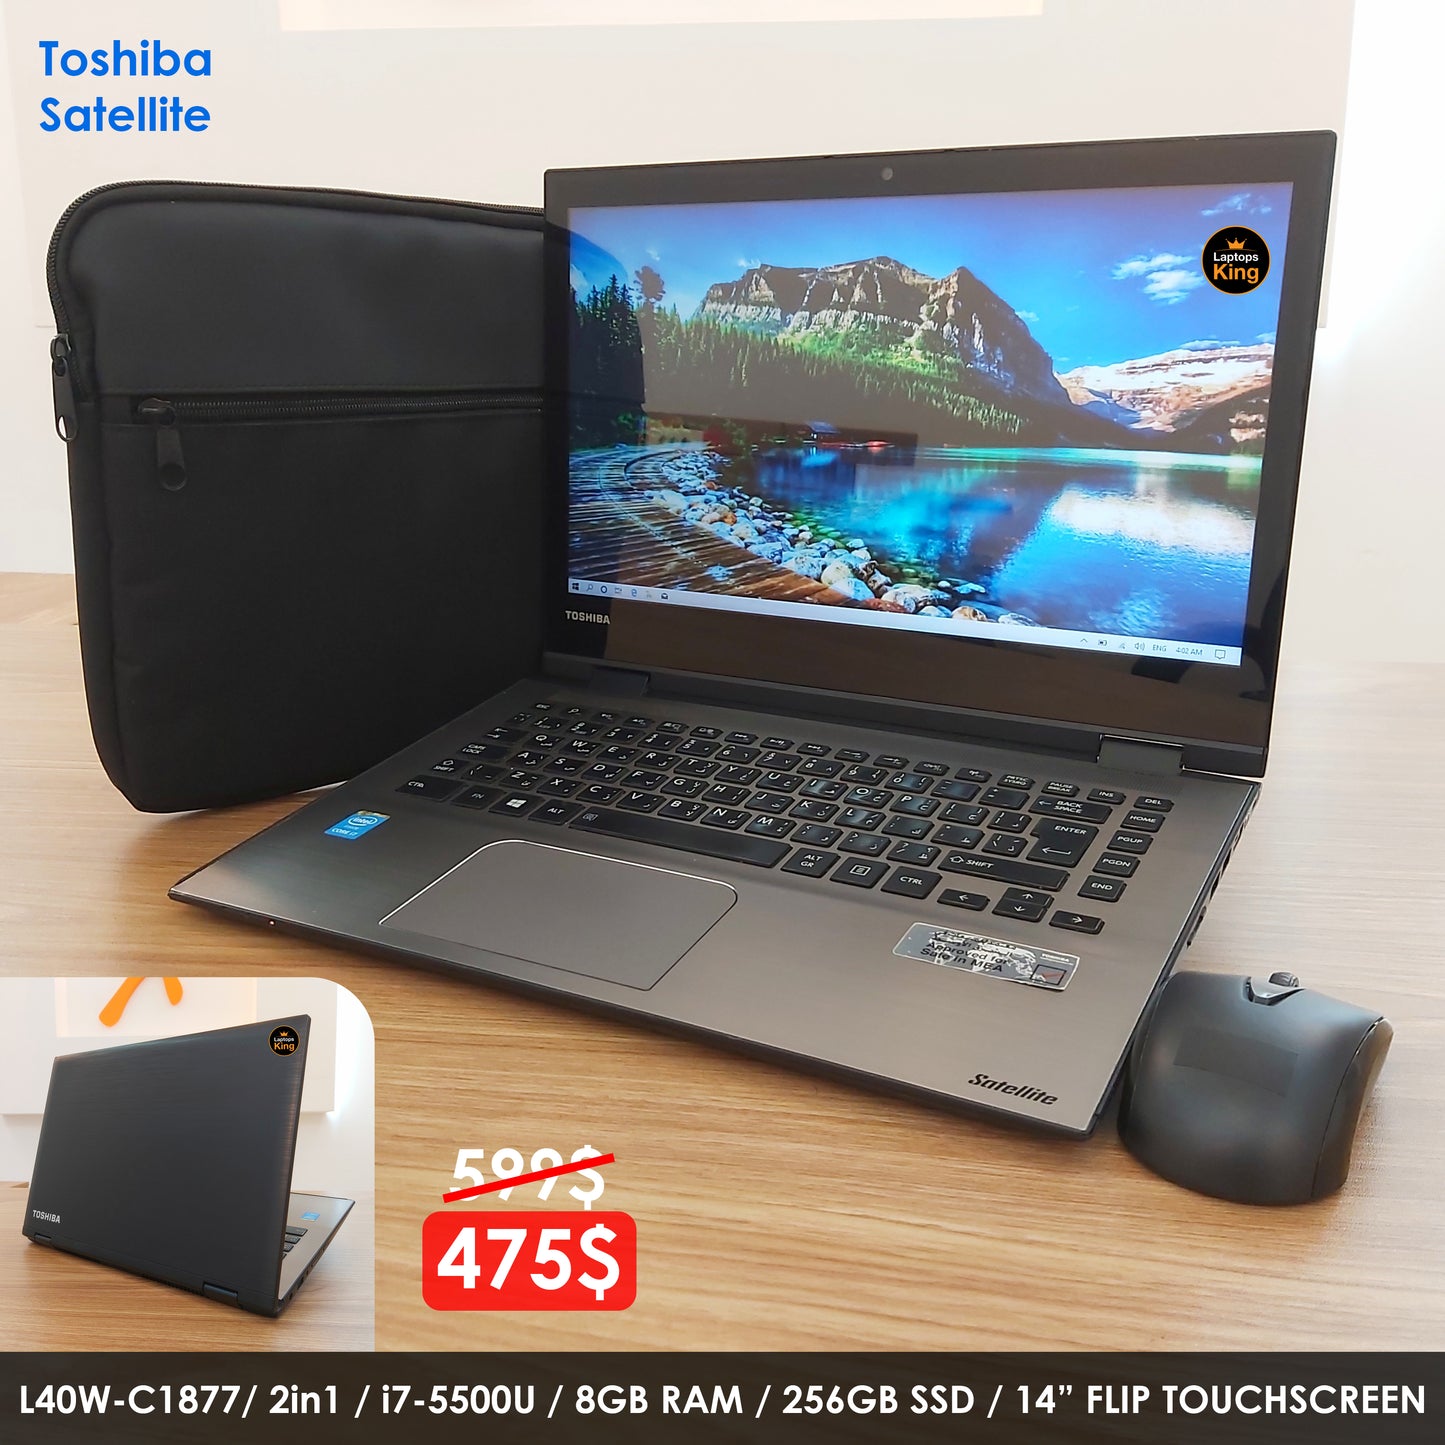 Toshiba Satellite L40w-C1877 2in1 Laptop (Used Very Clean)